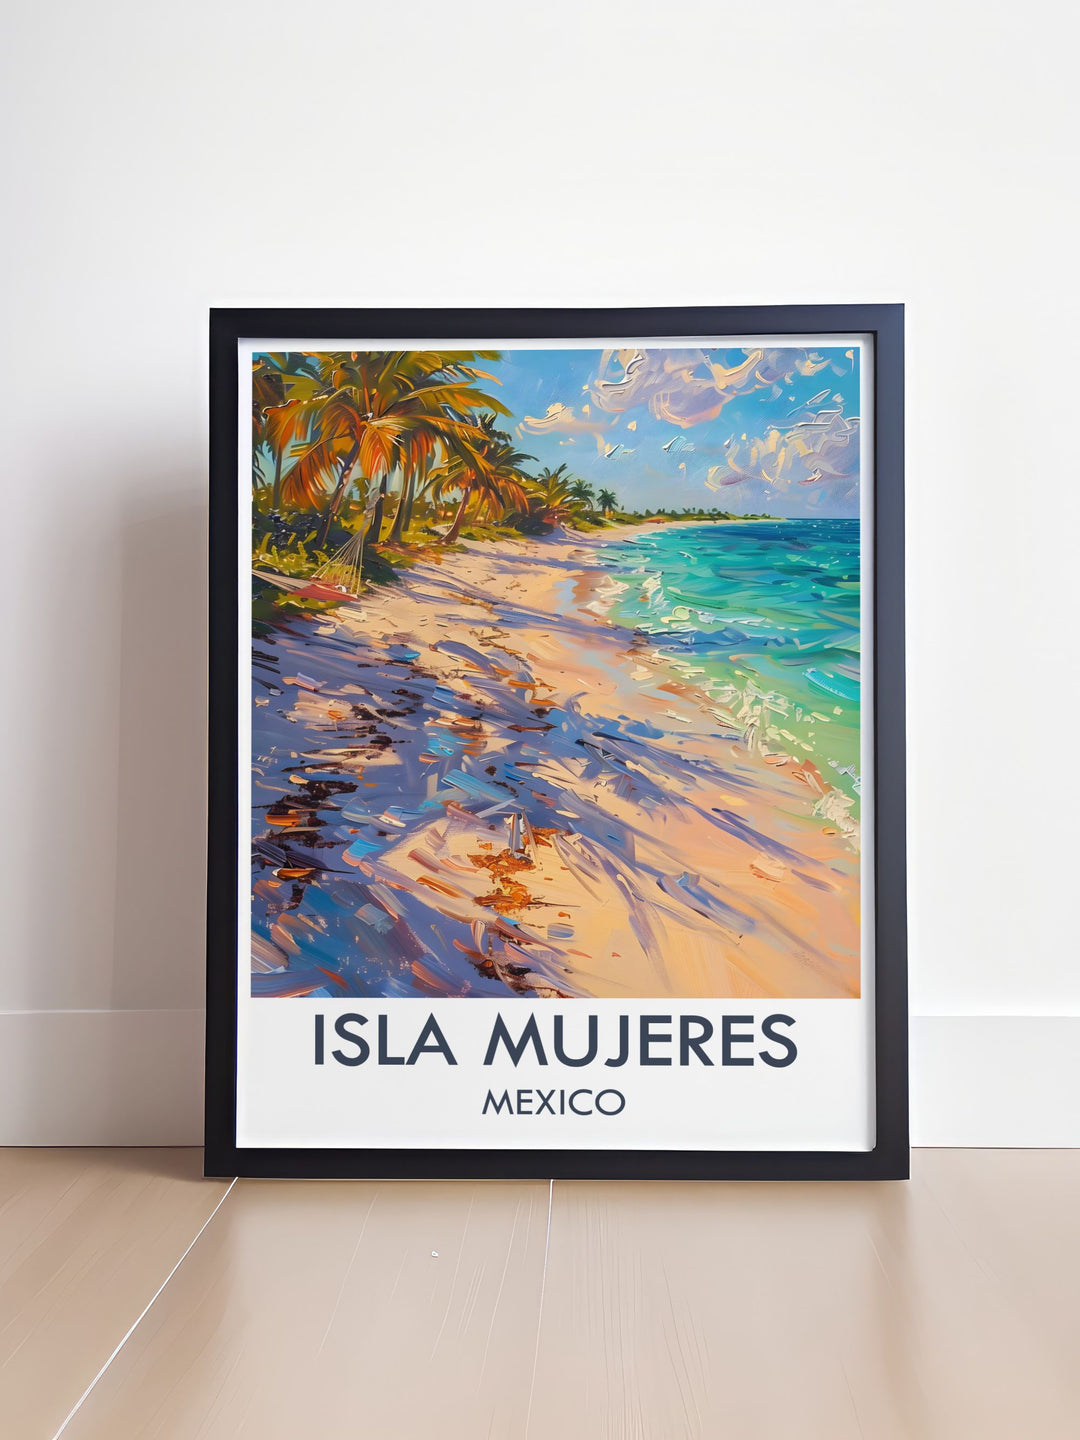 Vintage poster of Isla Mujeres, showcasing the islands rich cultural heritage and natural beauty, with a focus on its picturesque beaches and clear blue skies.